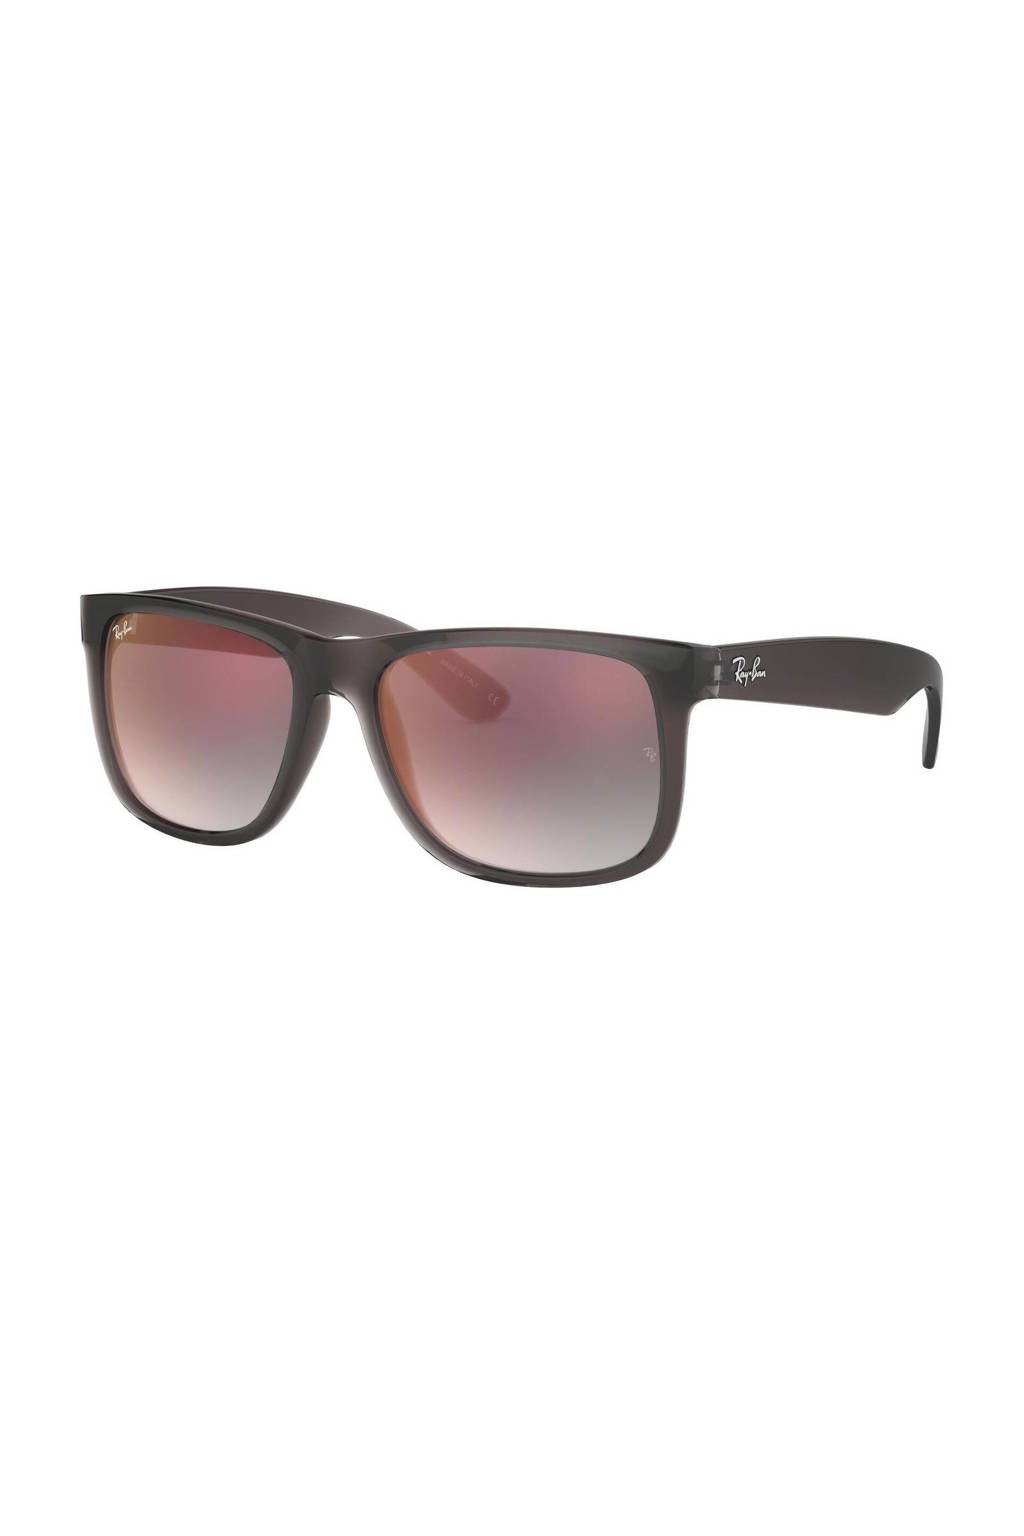 Ray-Ban zonnebril 0RB4165 donkerbruin